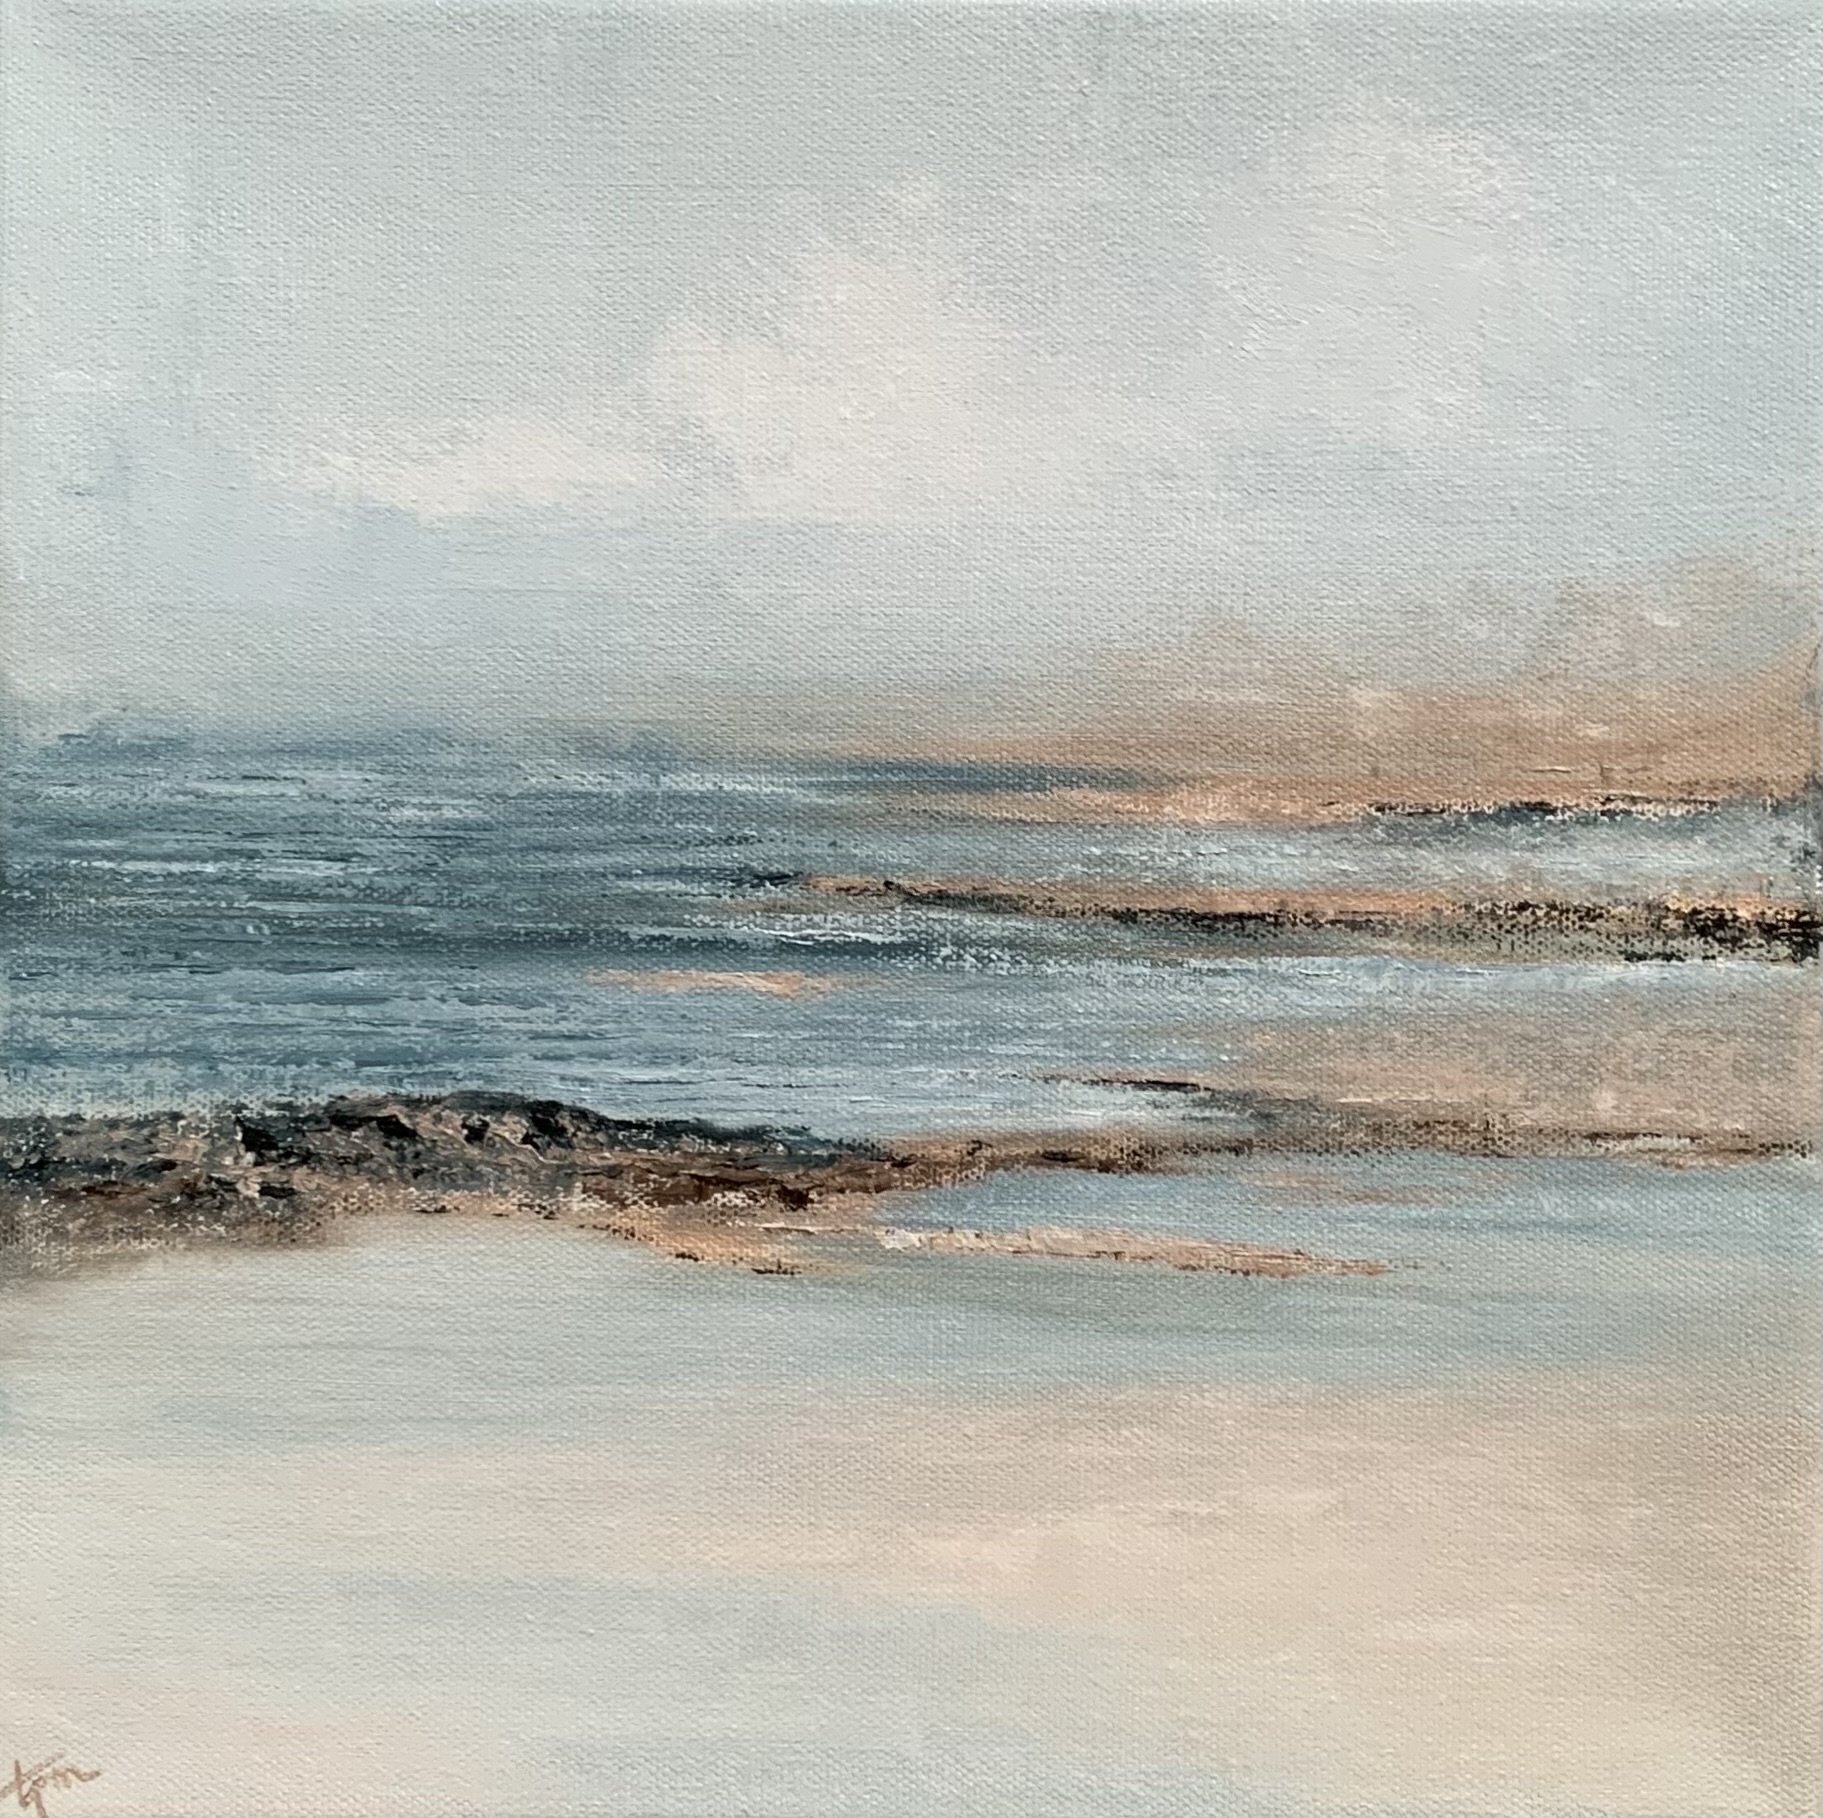 Photo of original seascape oil painting by Tisha Mark, "Tide Pools VI" 12"x12 oil on canvas (2022). Seascape painting in cool blues and grays with contrasting warm tones of brown featuring textures found in tide pools during a wintertime visit to a beach.